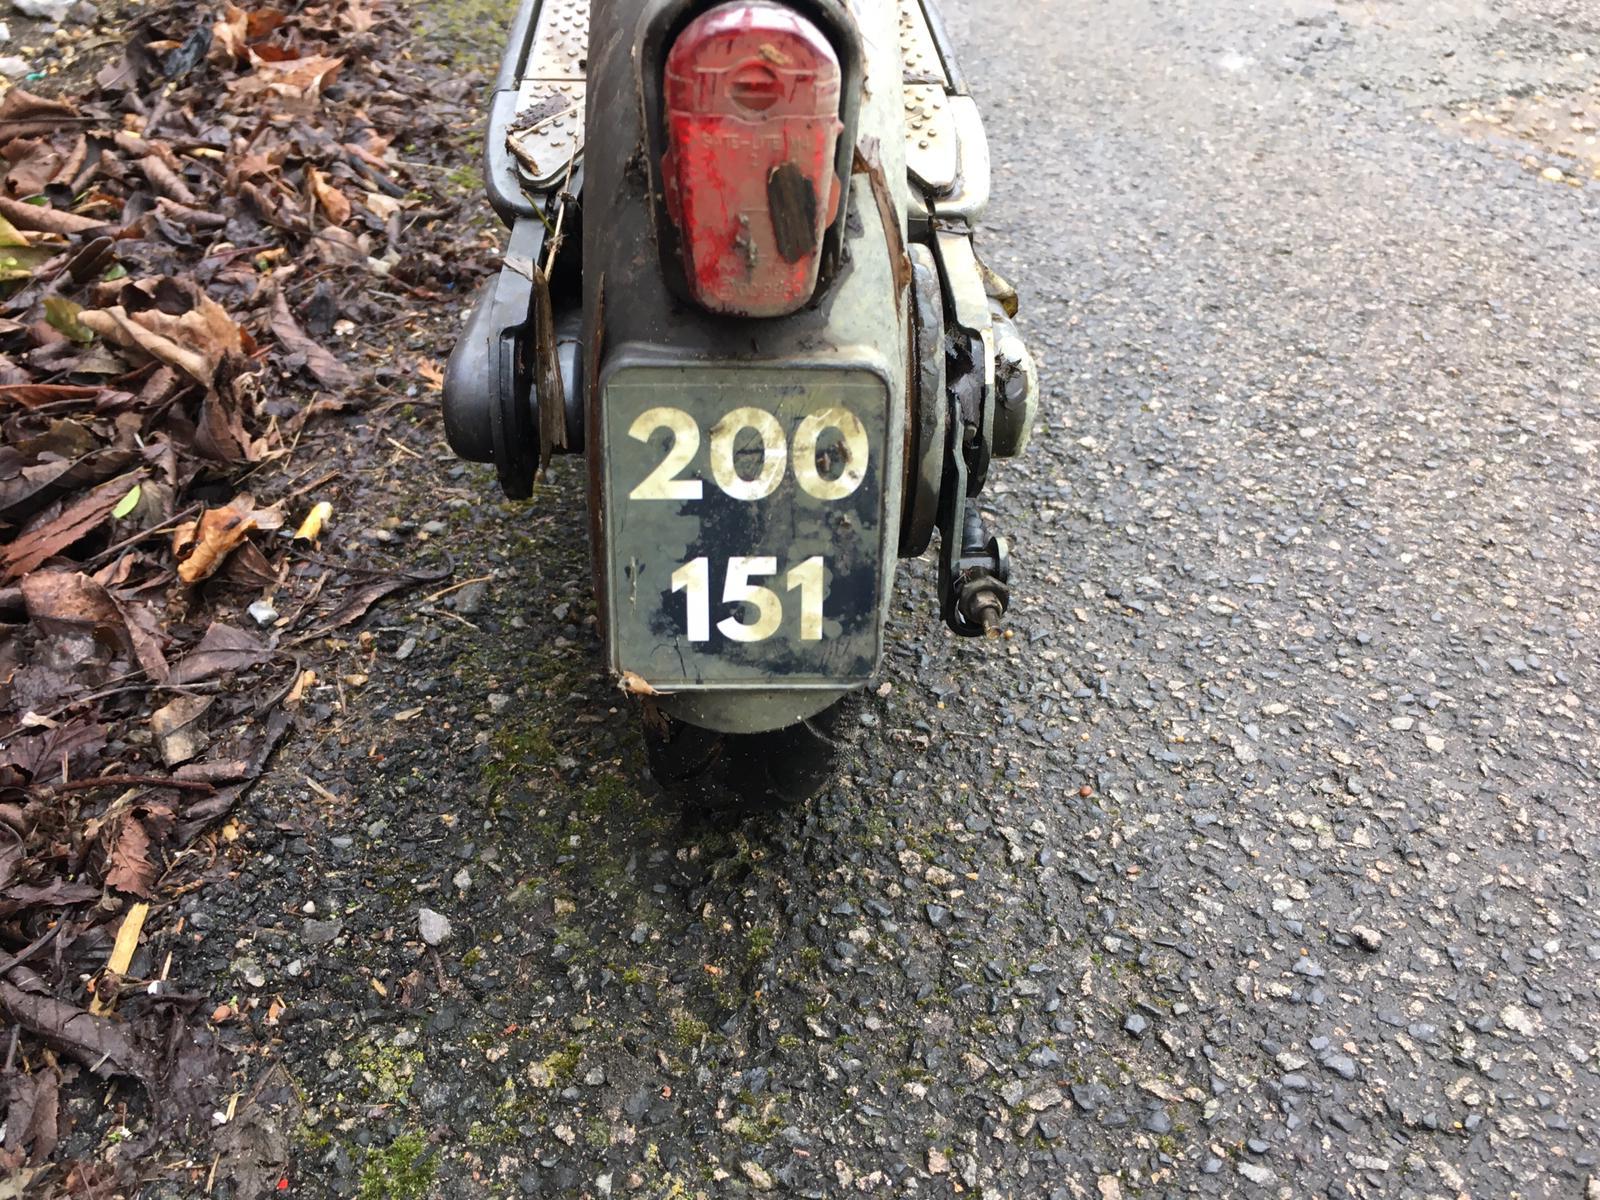 The numbe plate for the dumped scooter